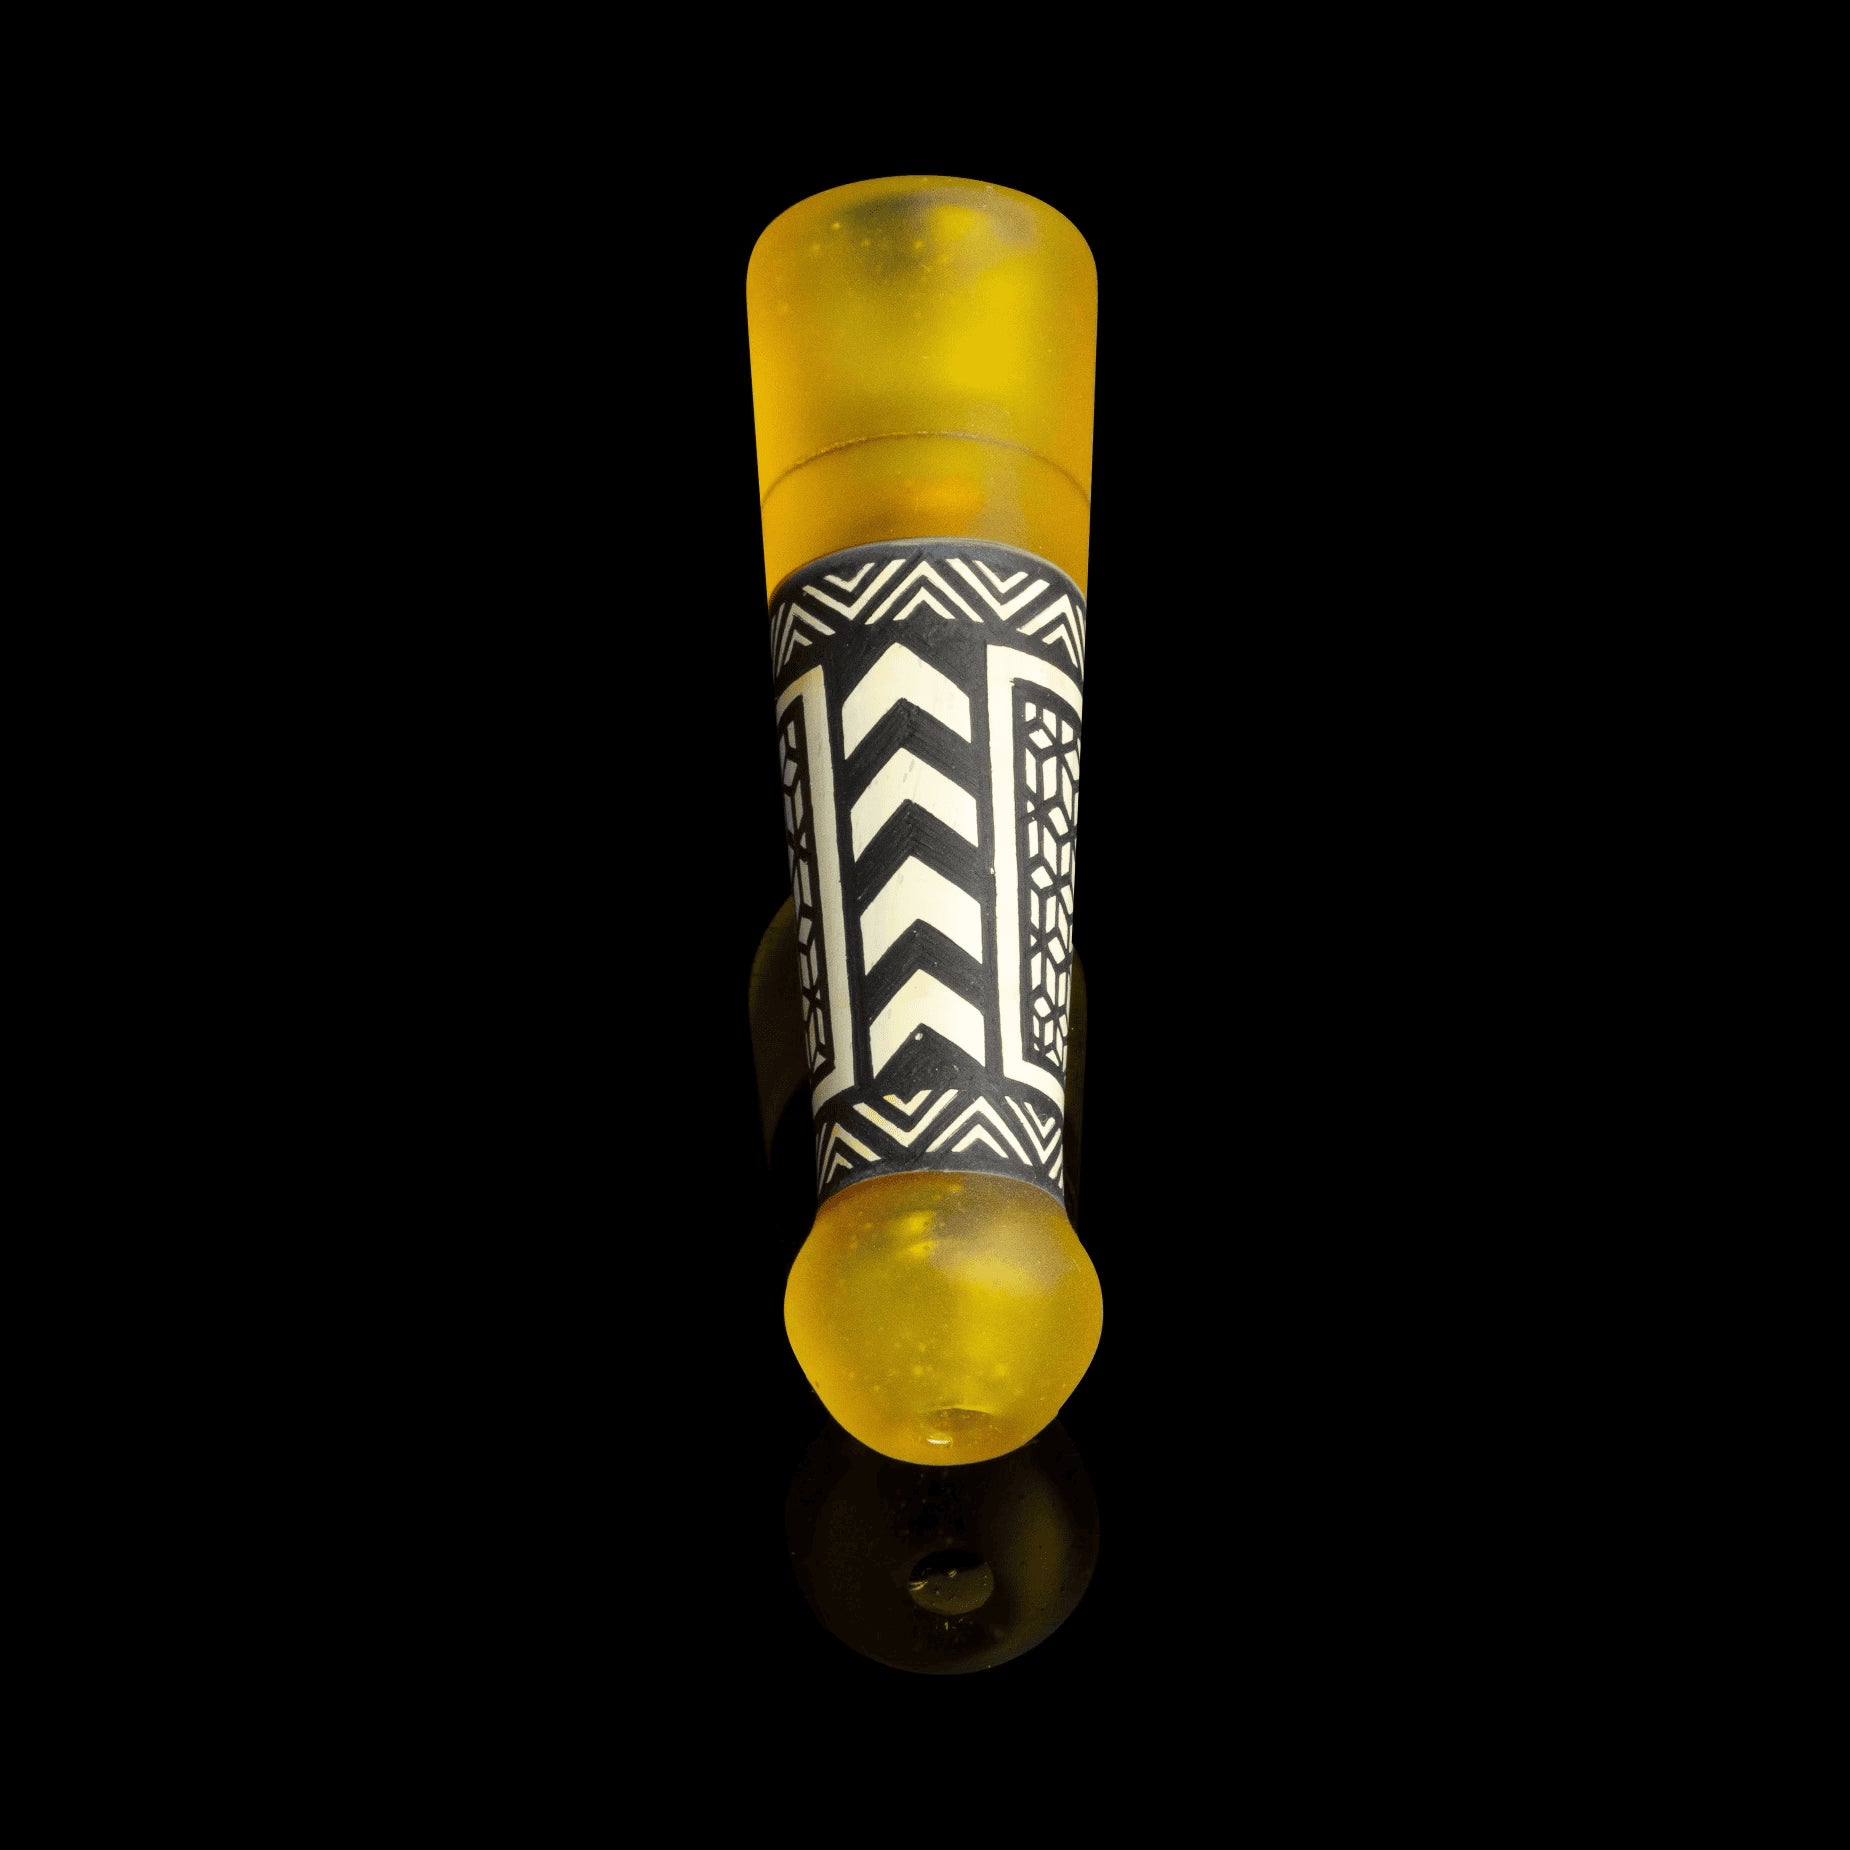 meticulously crafted art piece - Chillum (A) by Artist Stylie (GV 2022)